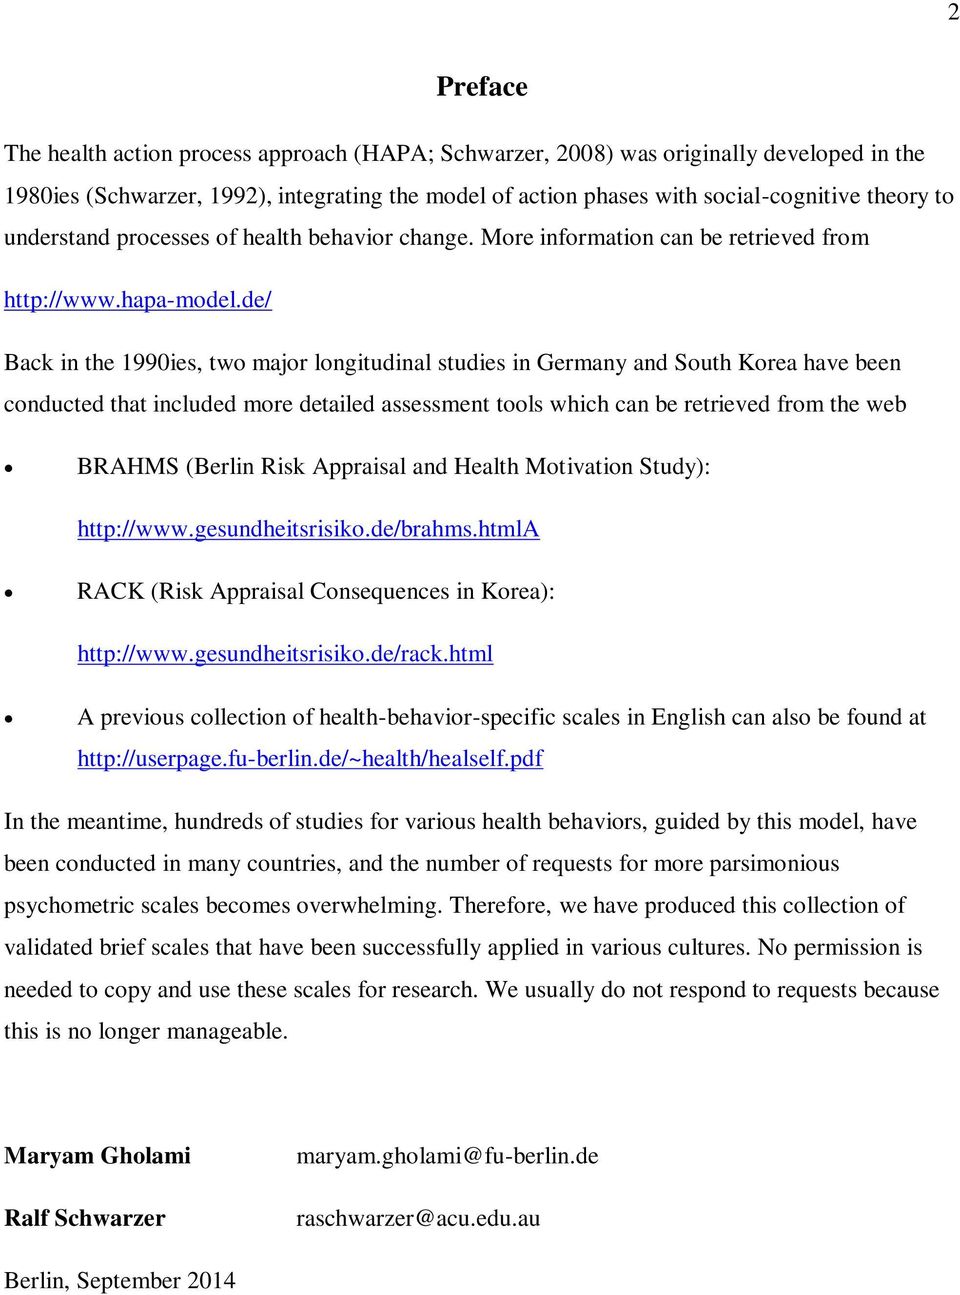 de/ Back in the 1990ies, two major longitudinal studies in Germany and South Korea have been conducted that included more detailed assessment tools which can be retrieved from the web BRAHMS (Berlin